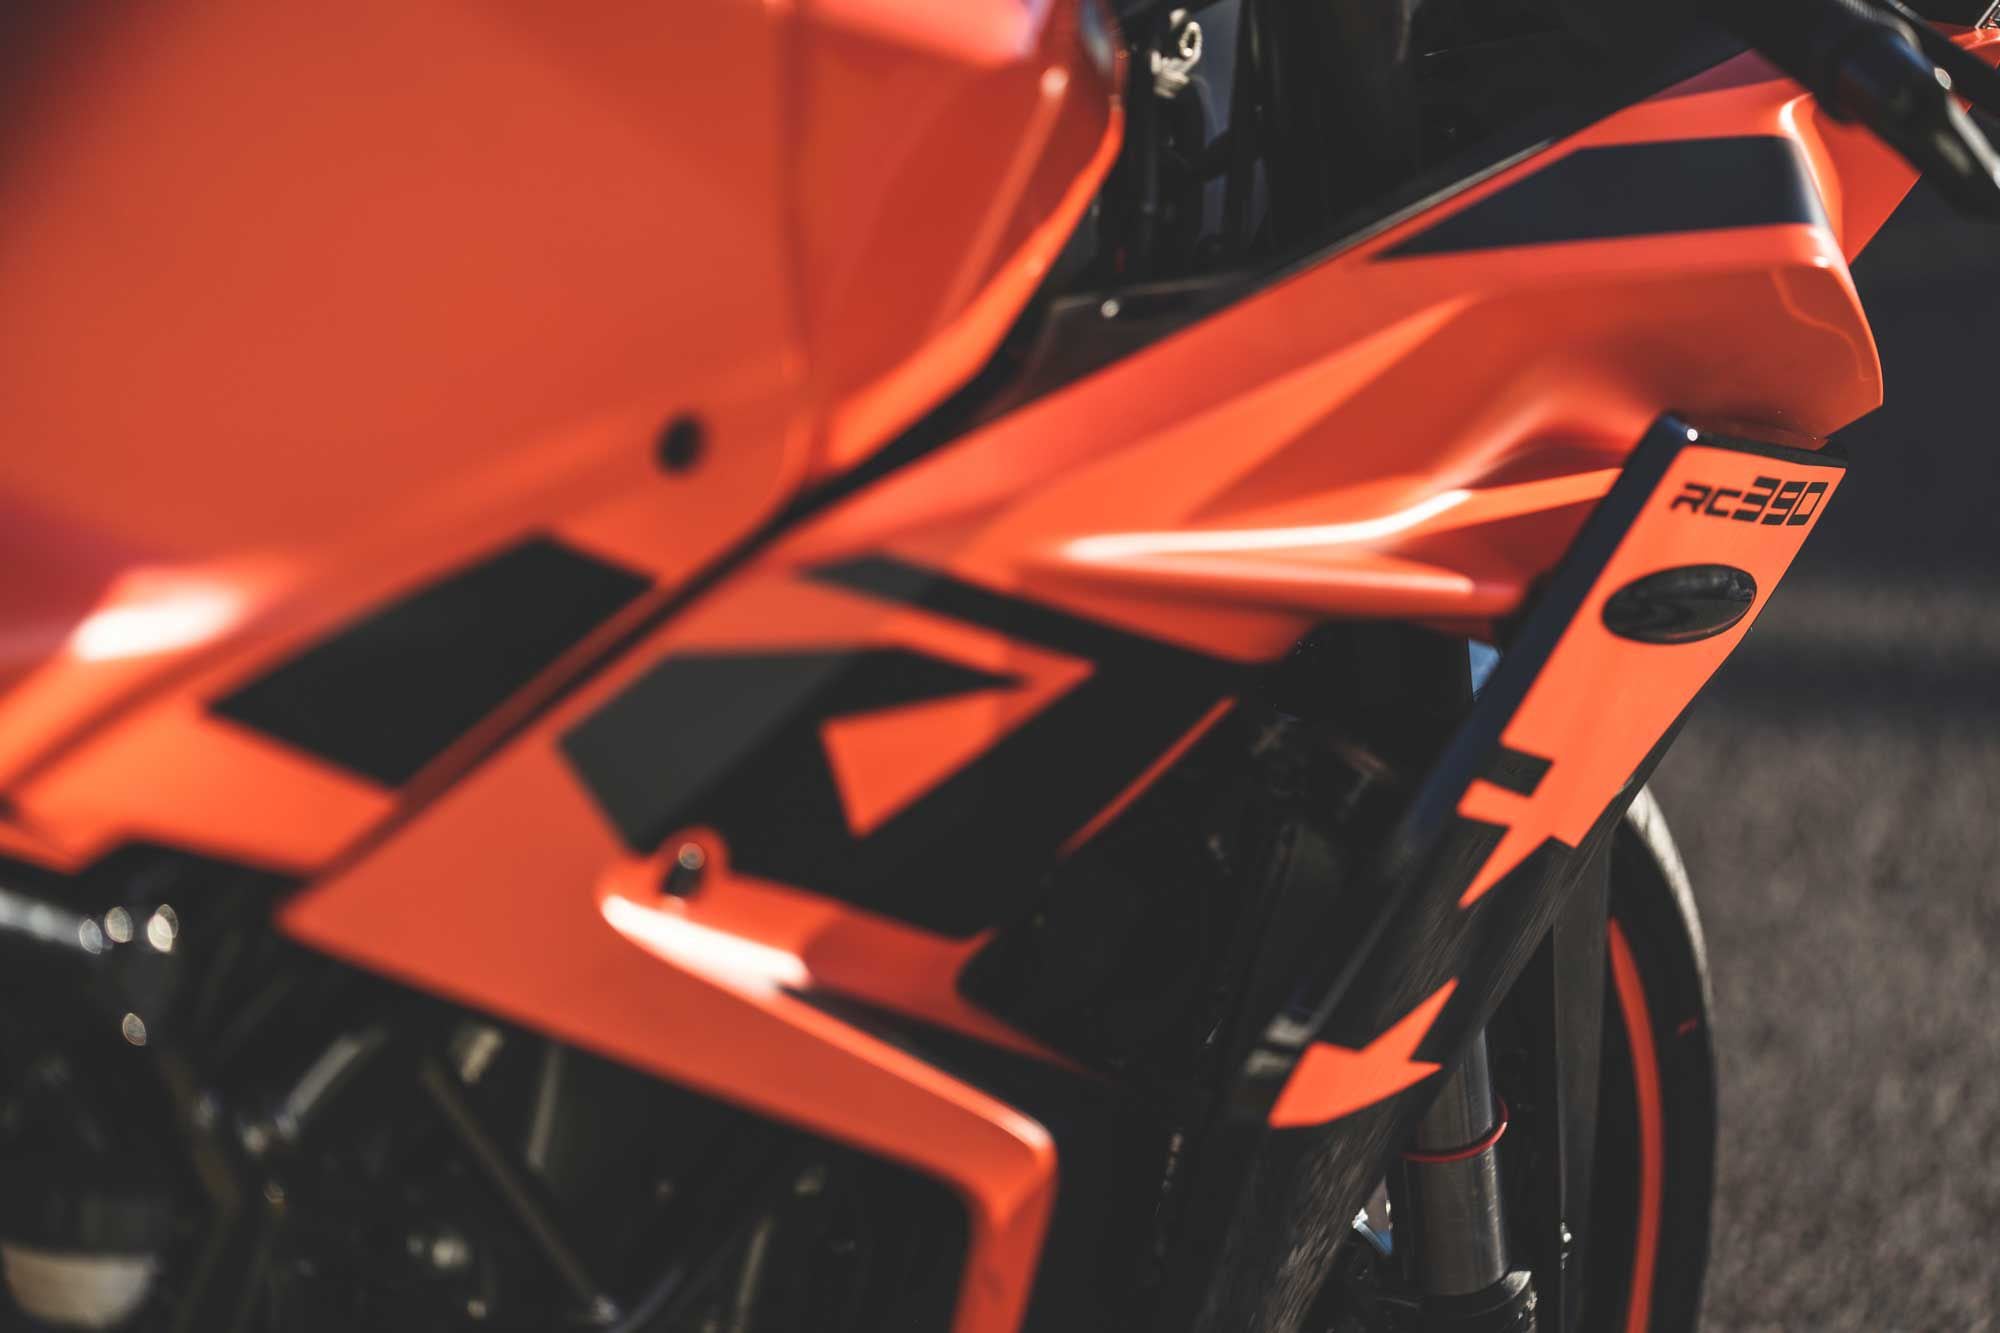 The RC 390’s bodywork encompasses serious inspiration from KTM’s RC16 MotoGP project, and is claimed to increase top speed by 7 mph.